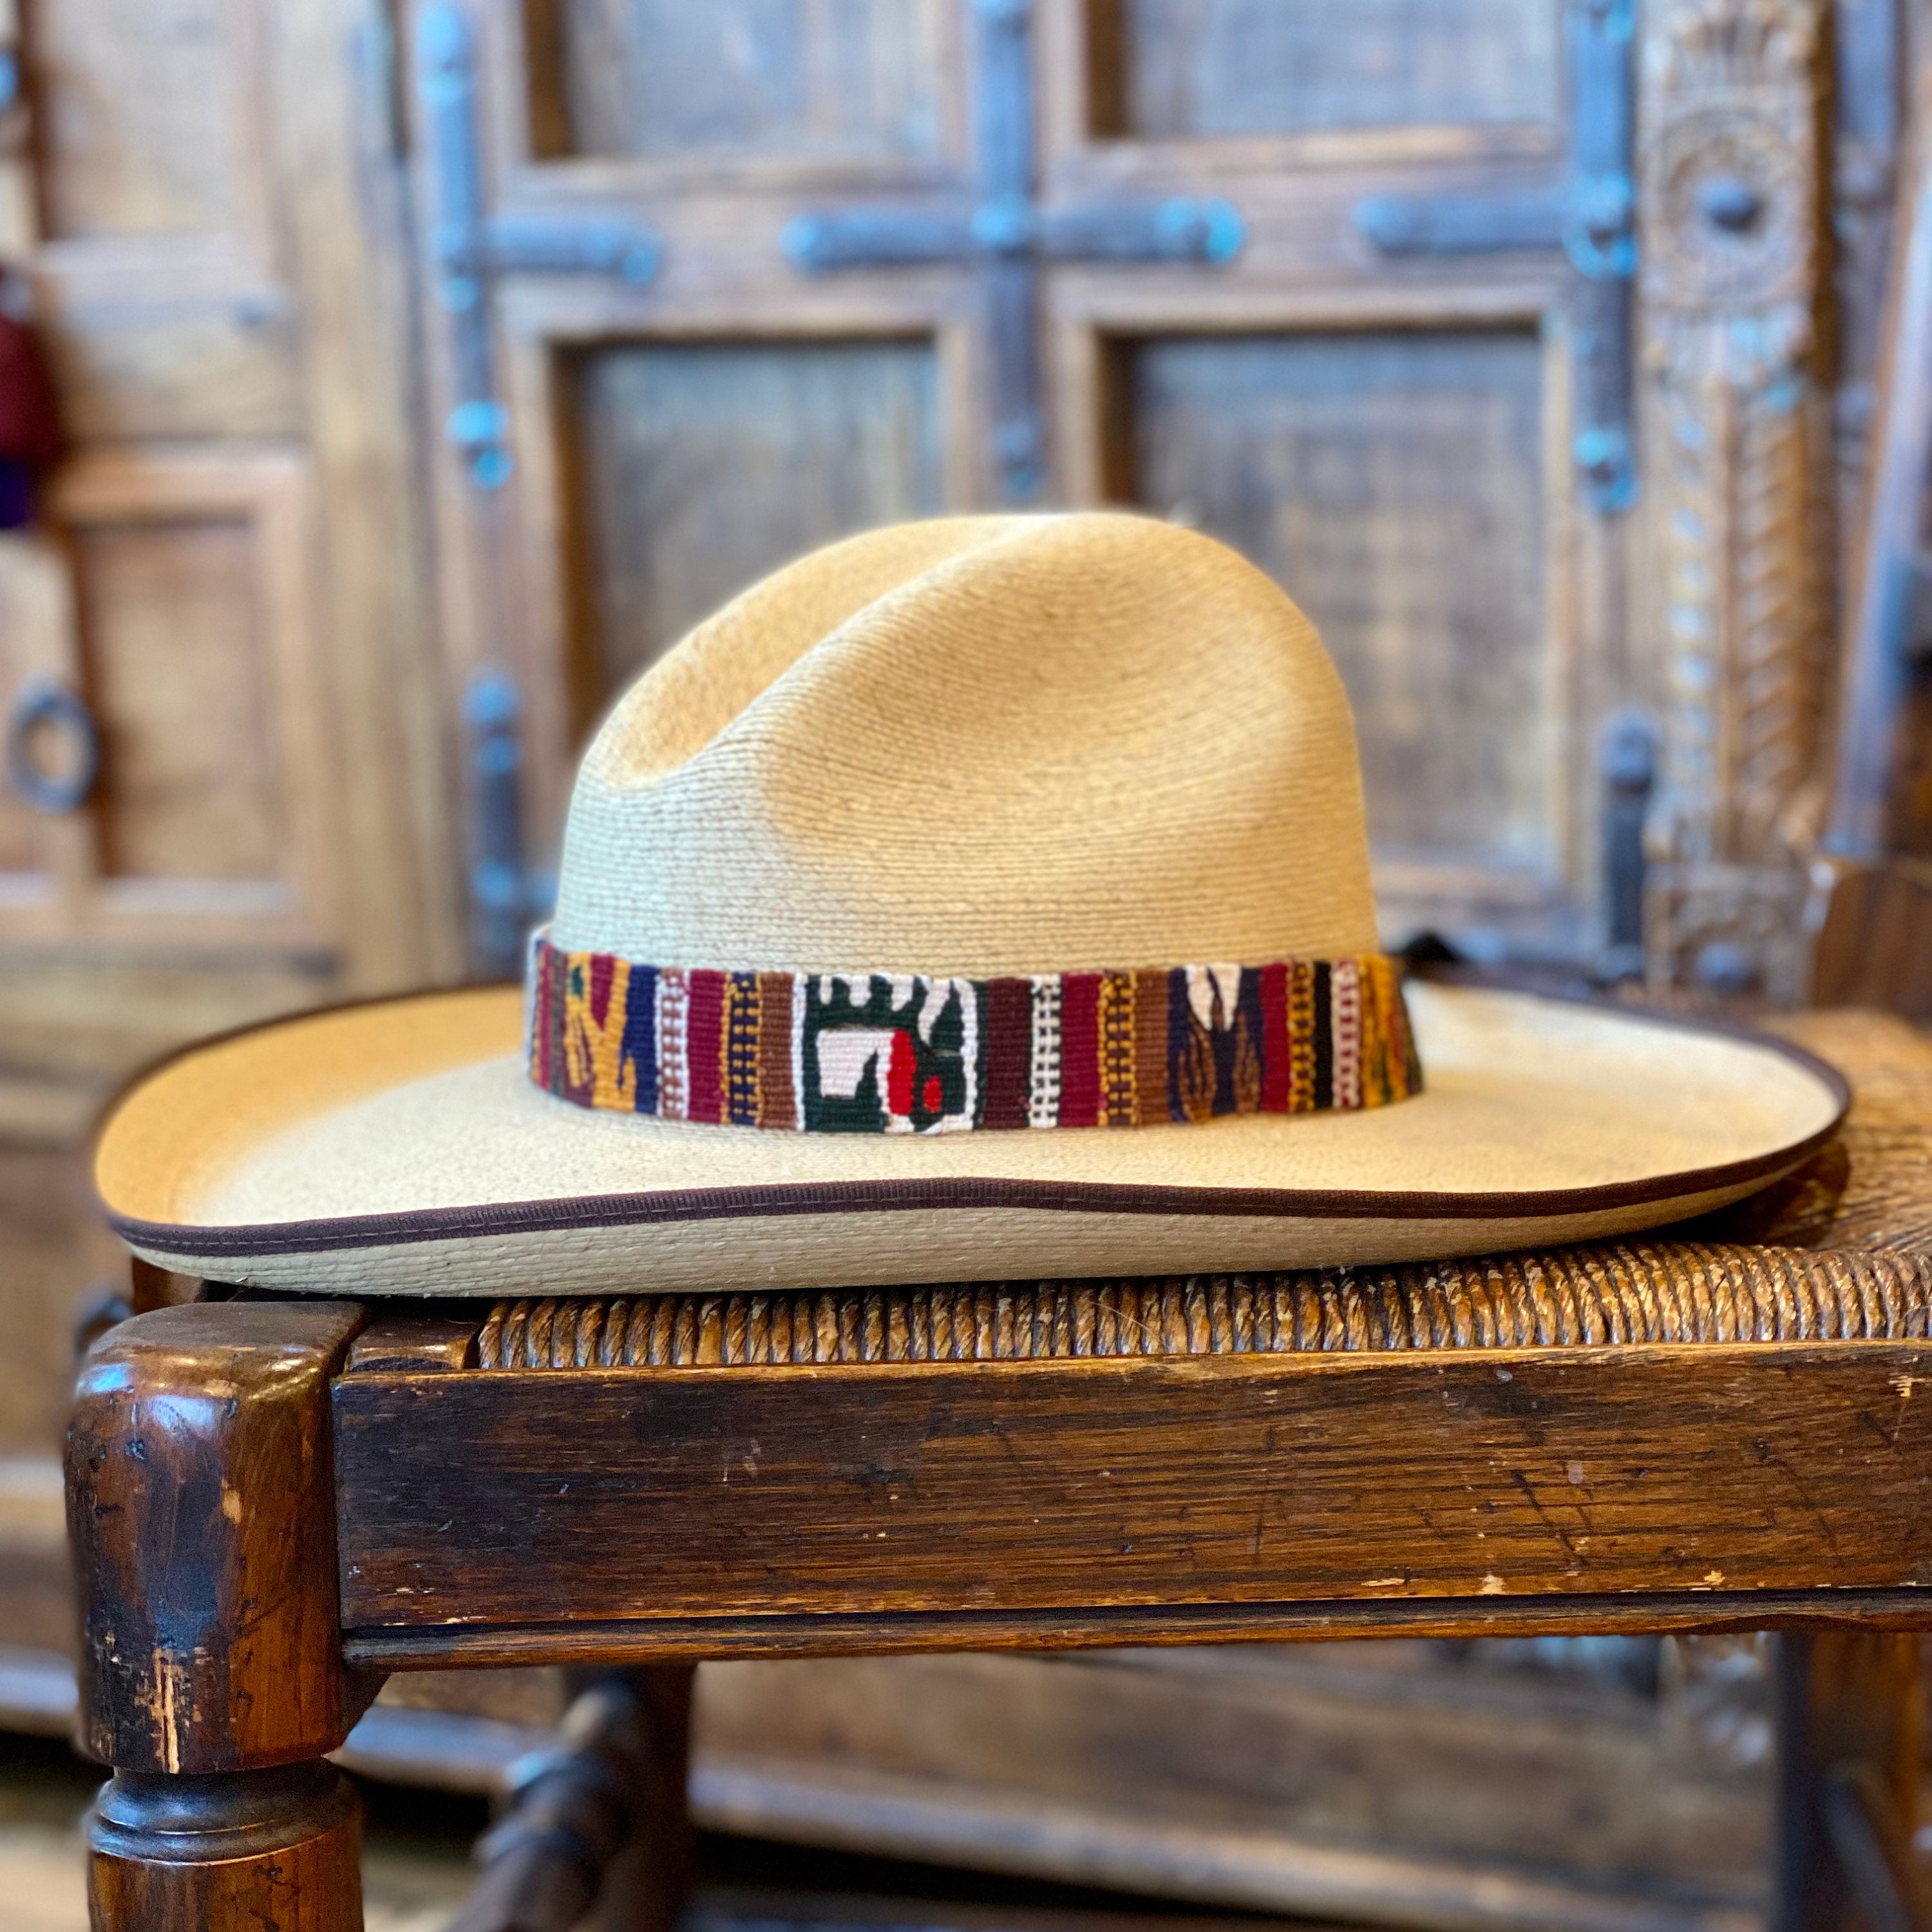 Hat Band, Hatband, Cowboy, Western, Leather, Beaded, Multi-Color, Aztec Designs, Handmade in Guatemala 7/8 x 21 (Hatband 7)